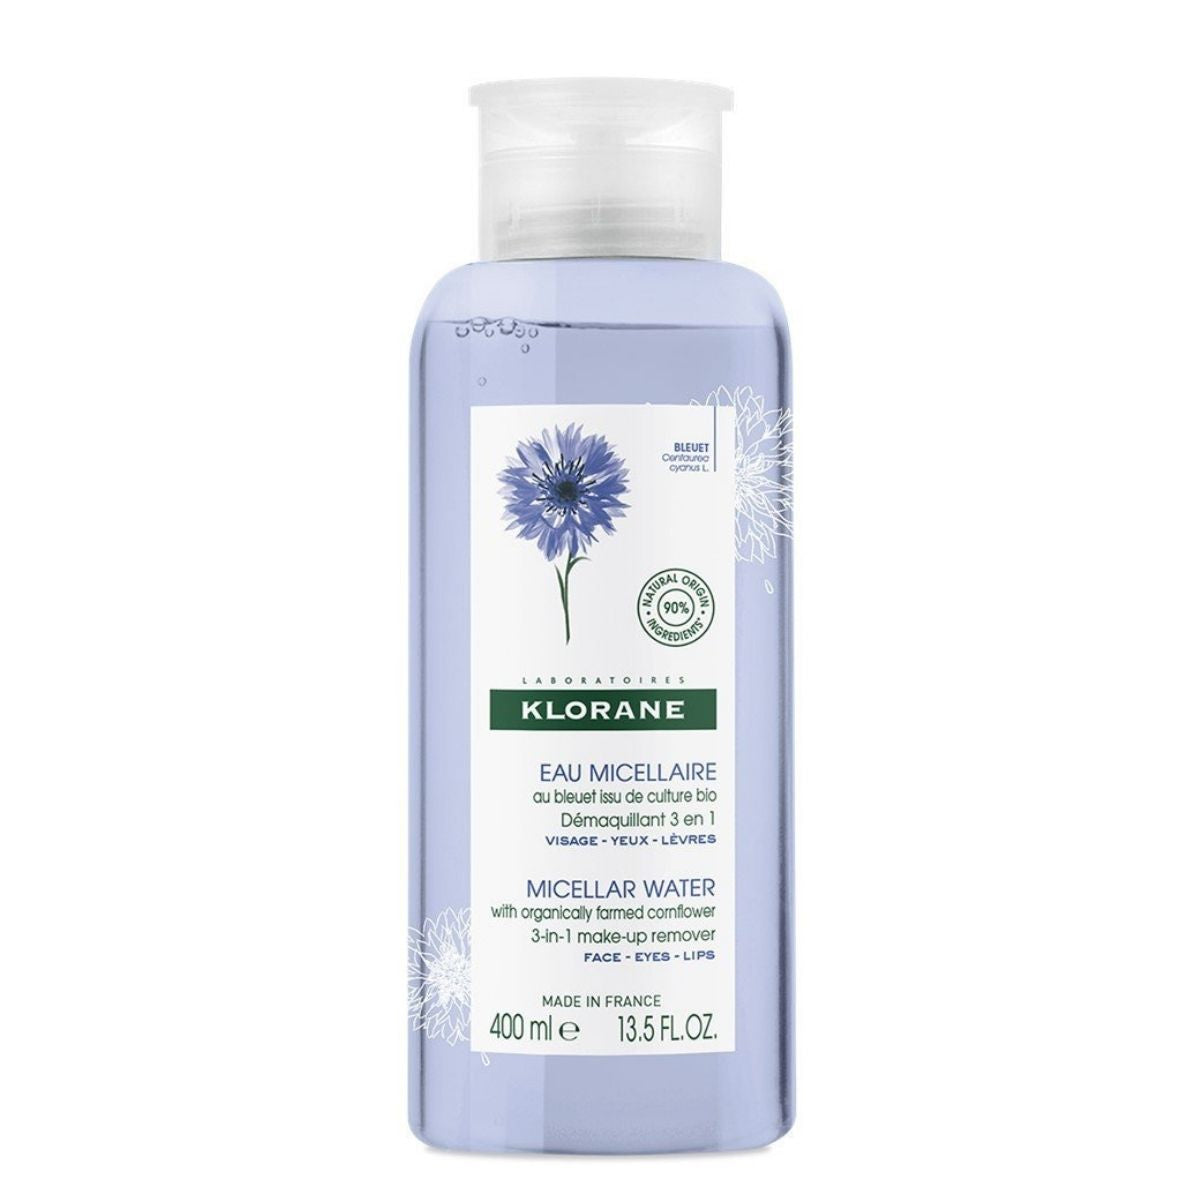 Klorane Soothing Micellar Cleanser. 60% OFF